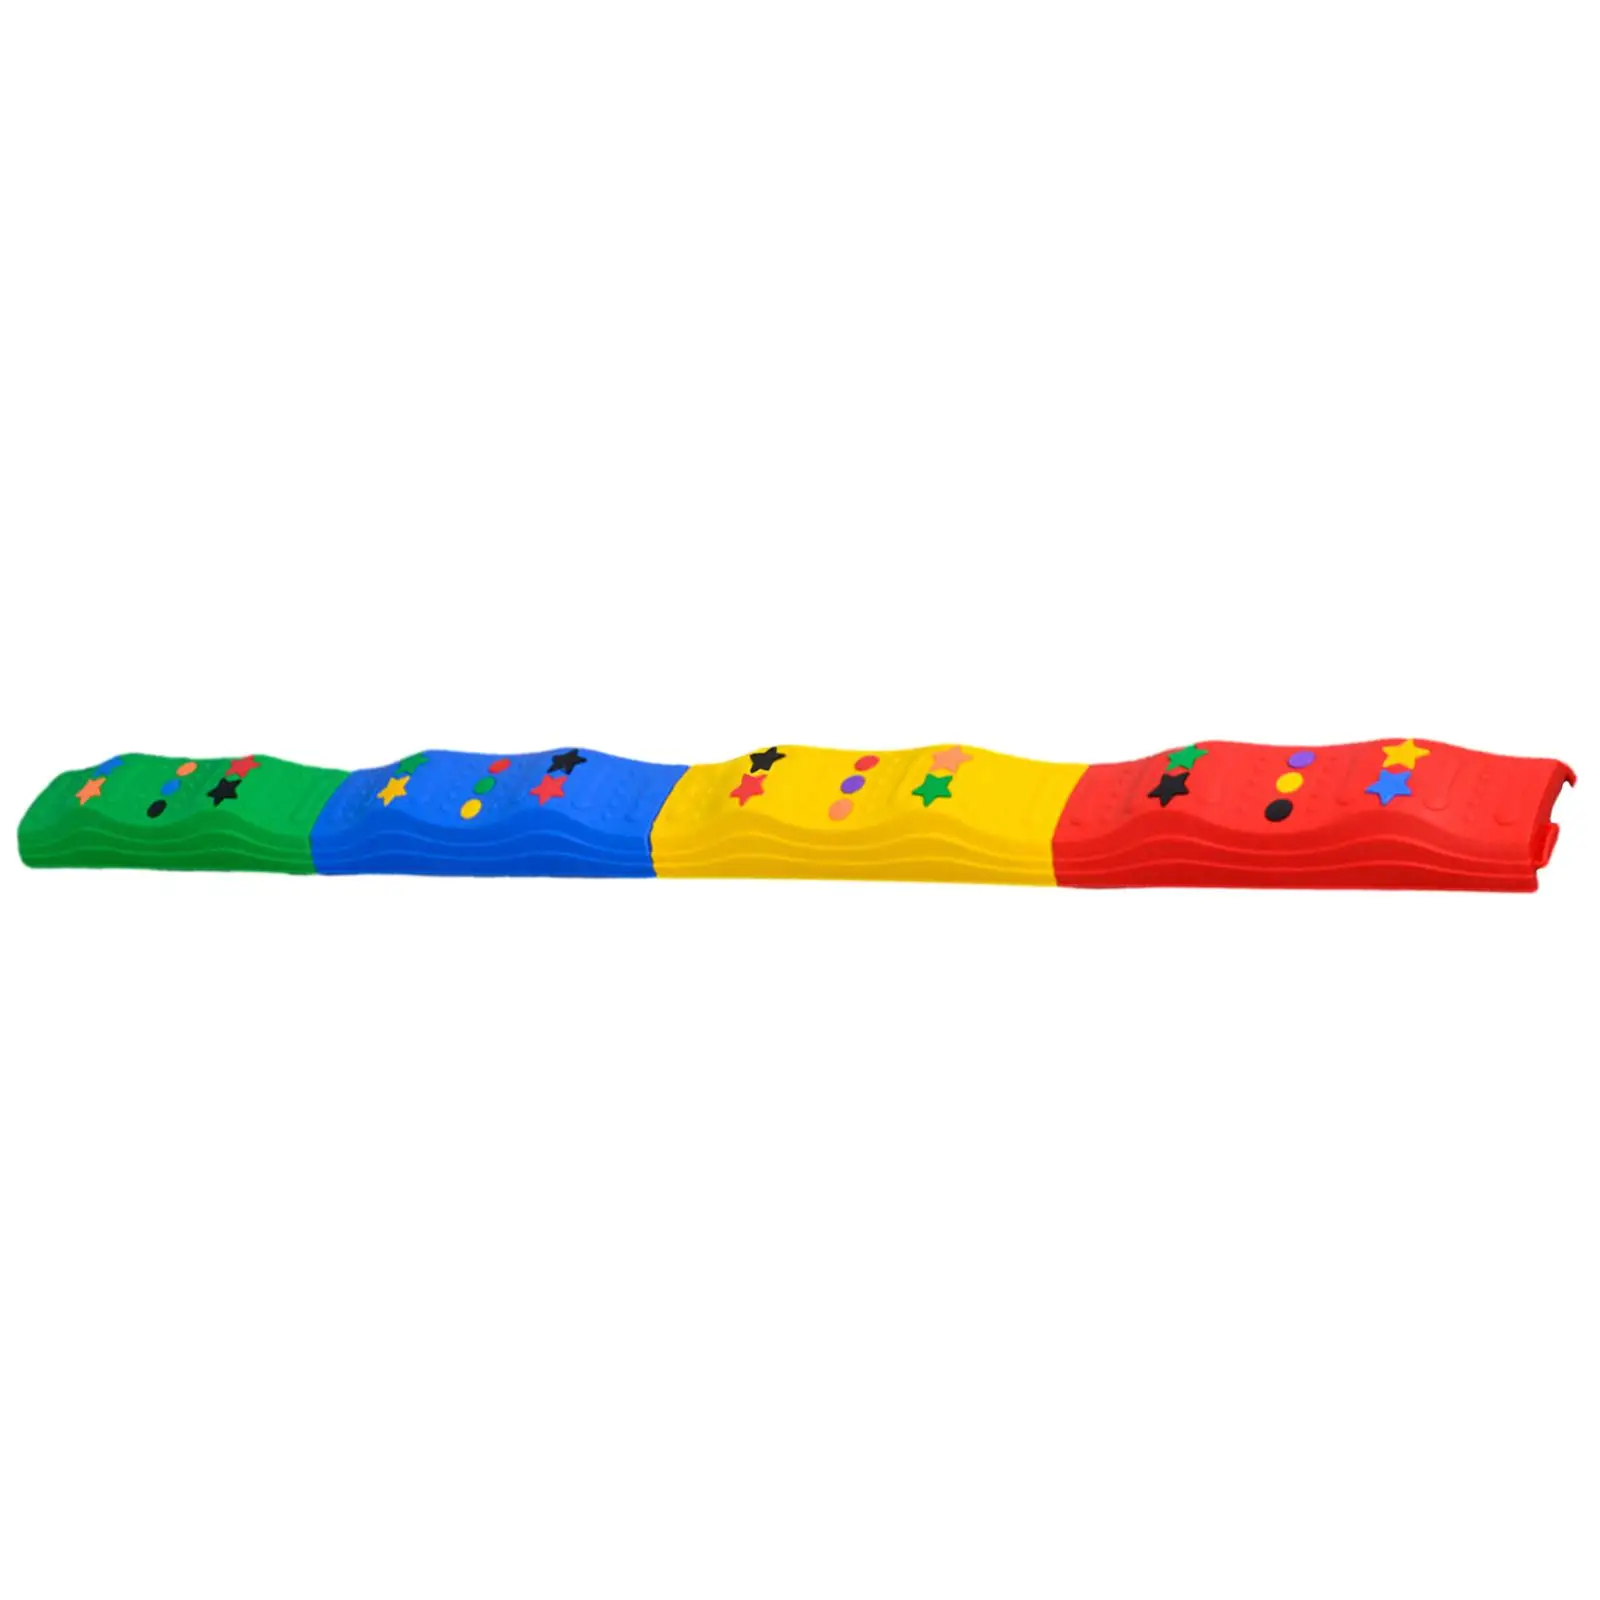 Balance Beams Promote Balance Strength Coordination Non Slip Obstacle Course